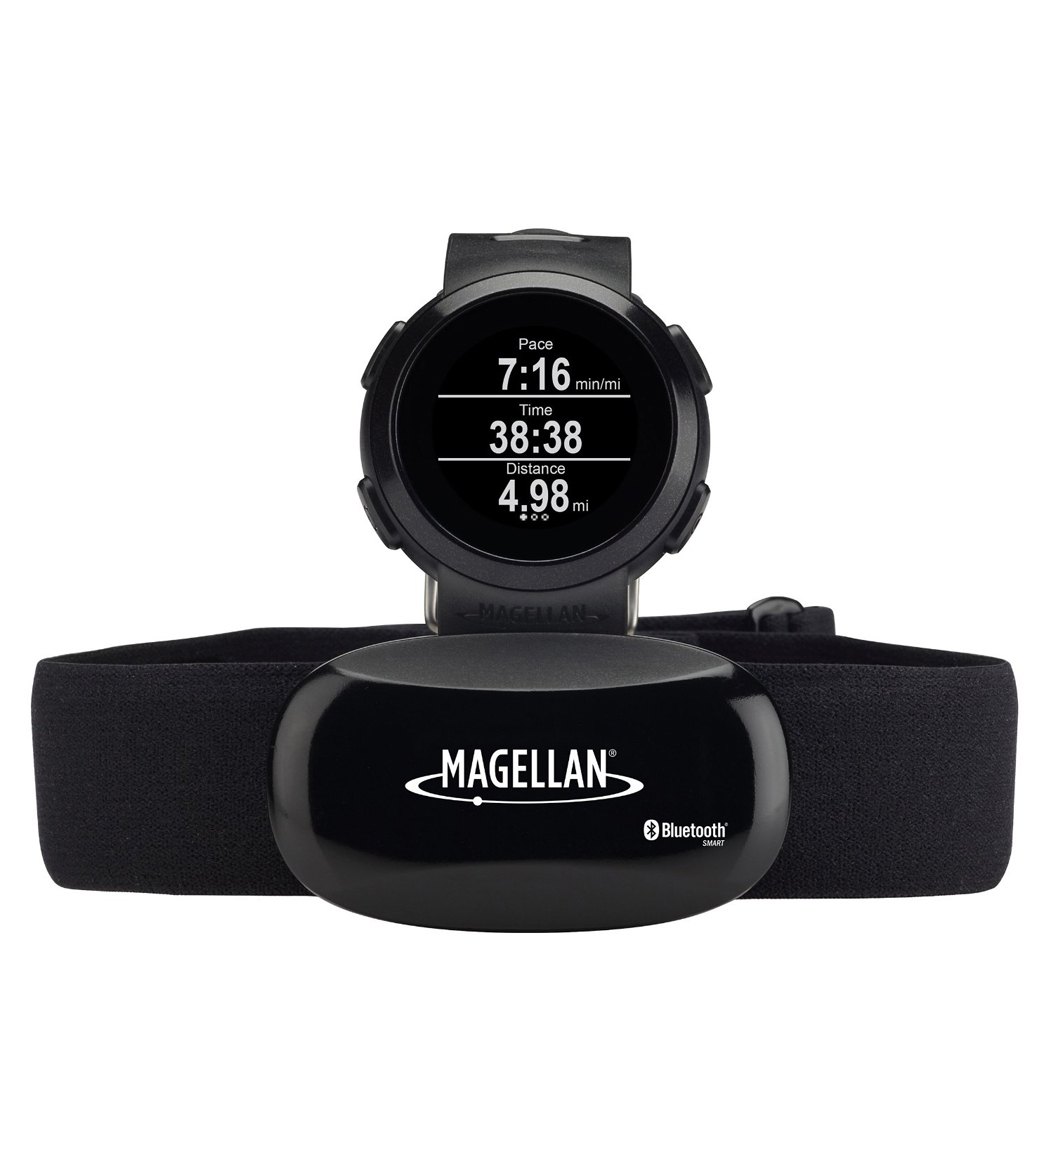 Magellan The Echotm Smart Sport Watch With Heart Rate Monitor - Black - Swimoutlet.com